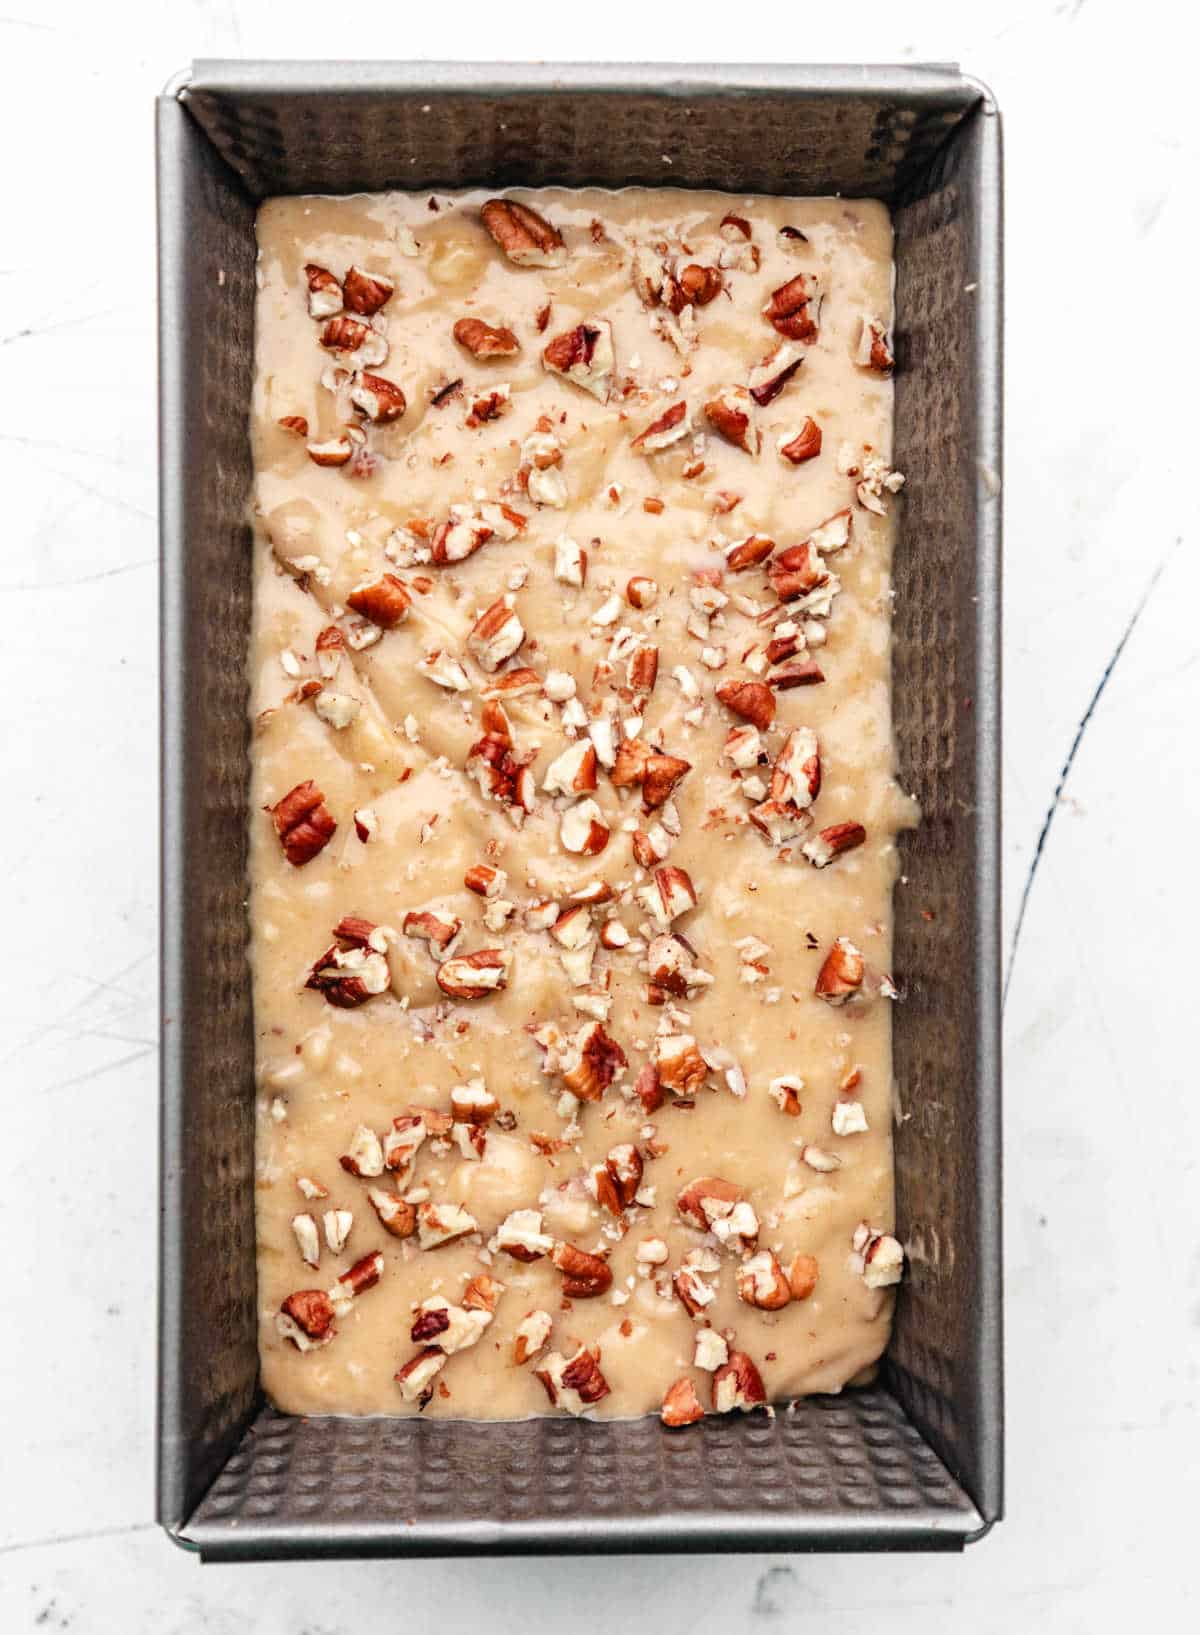 Chopped pecans on top of banana nut bread batter. 